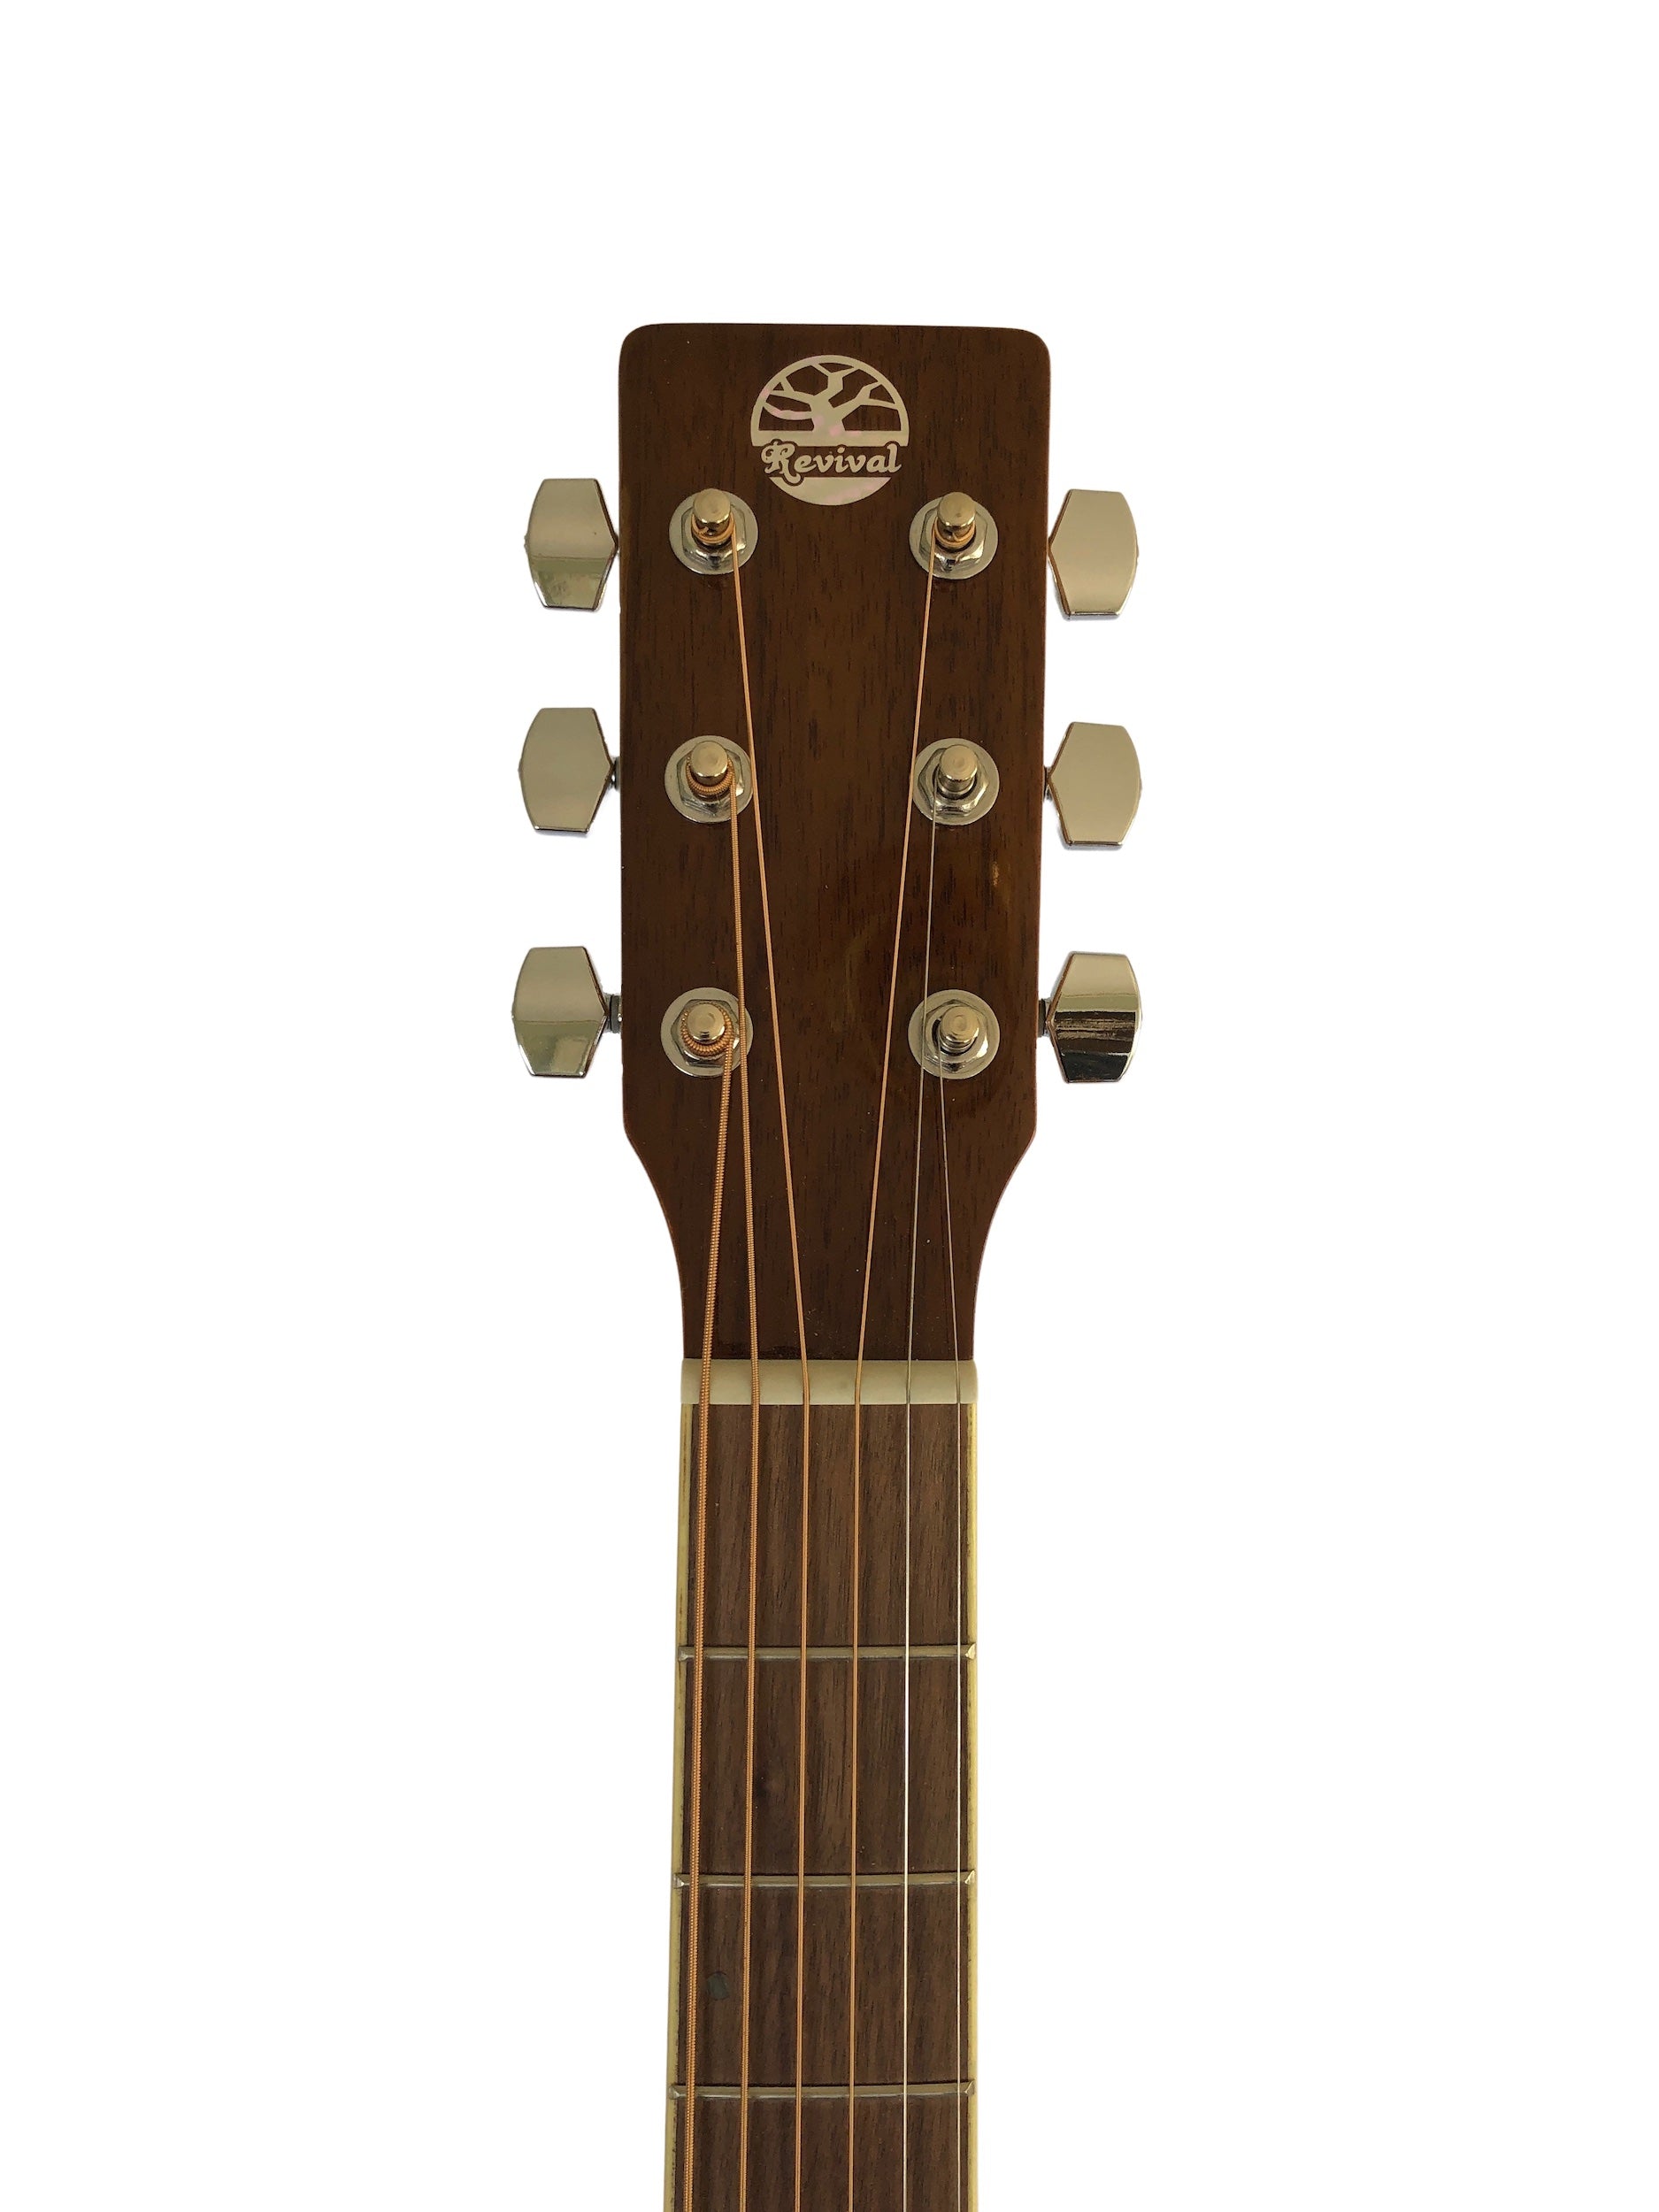 Photo of the headstock of the Revival rg-25 acoustic guitar.